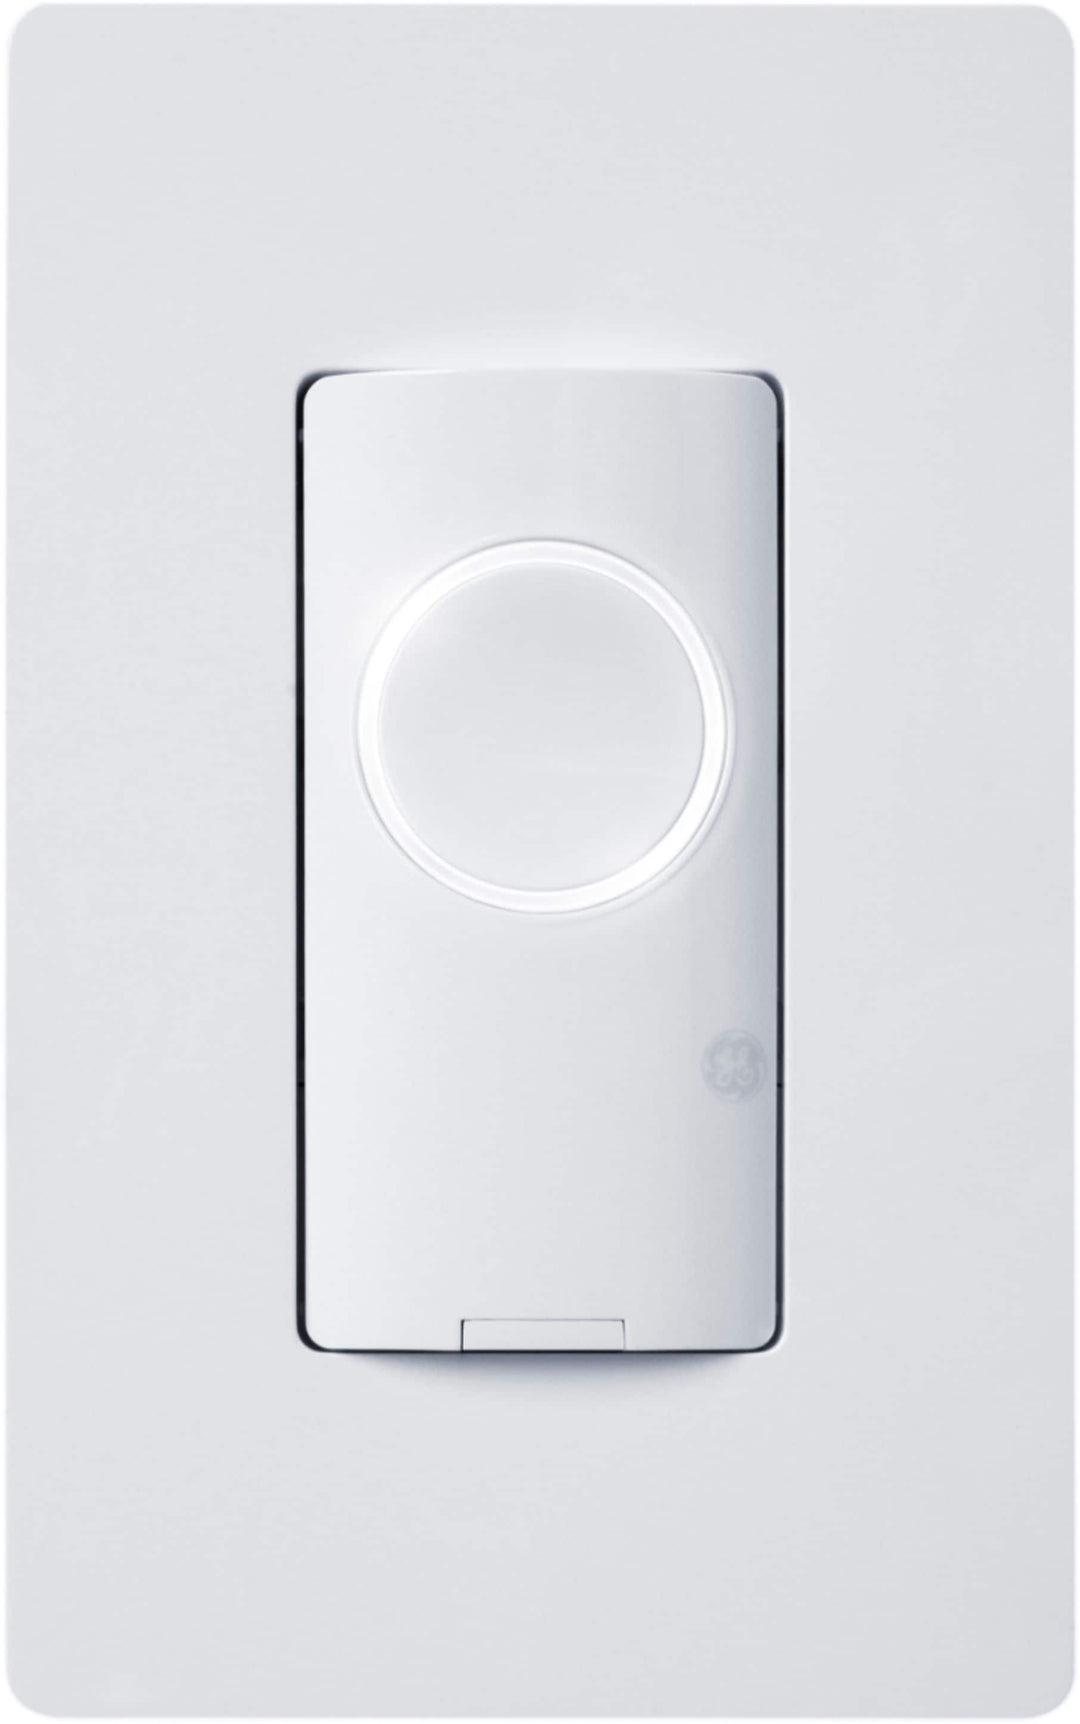 GE - CYNC Smart Switch, No Neutral Wire Required, On-Off Button Style with Bluetooth and 2.4 GHz Wifi (Packaging May Vary) - White_4